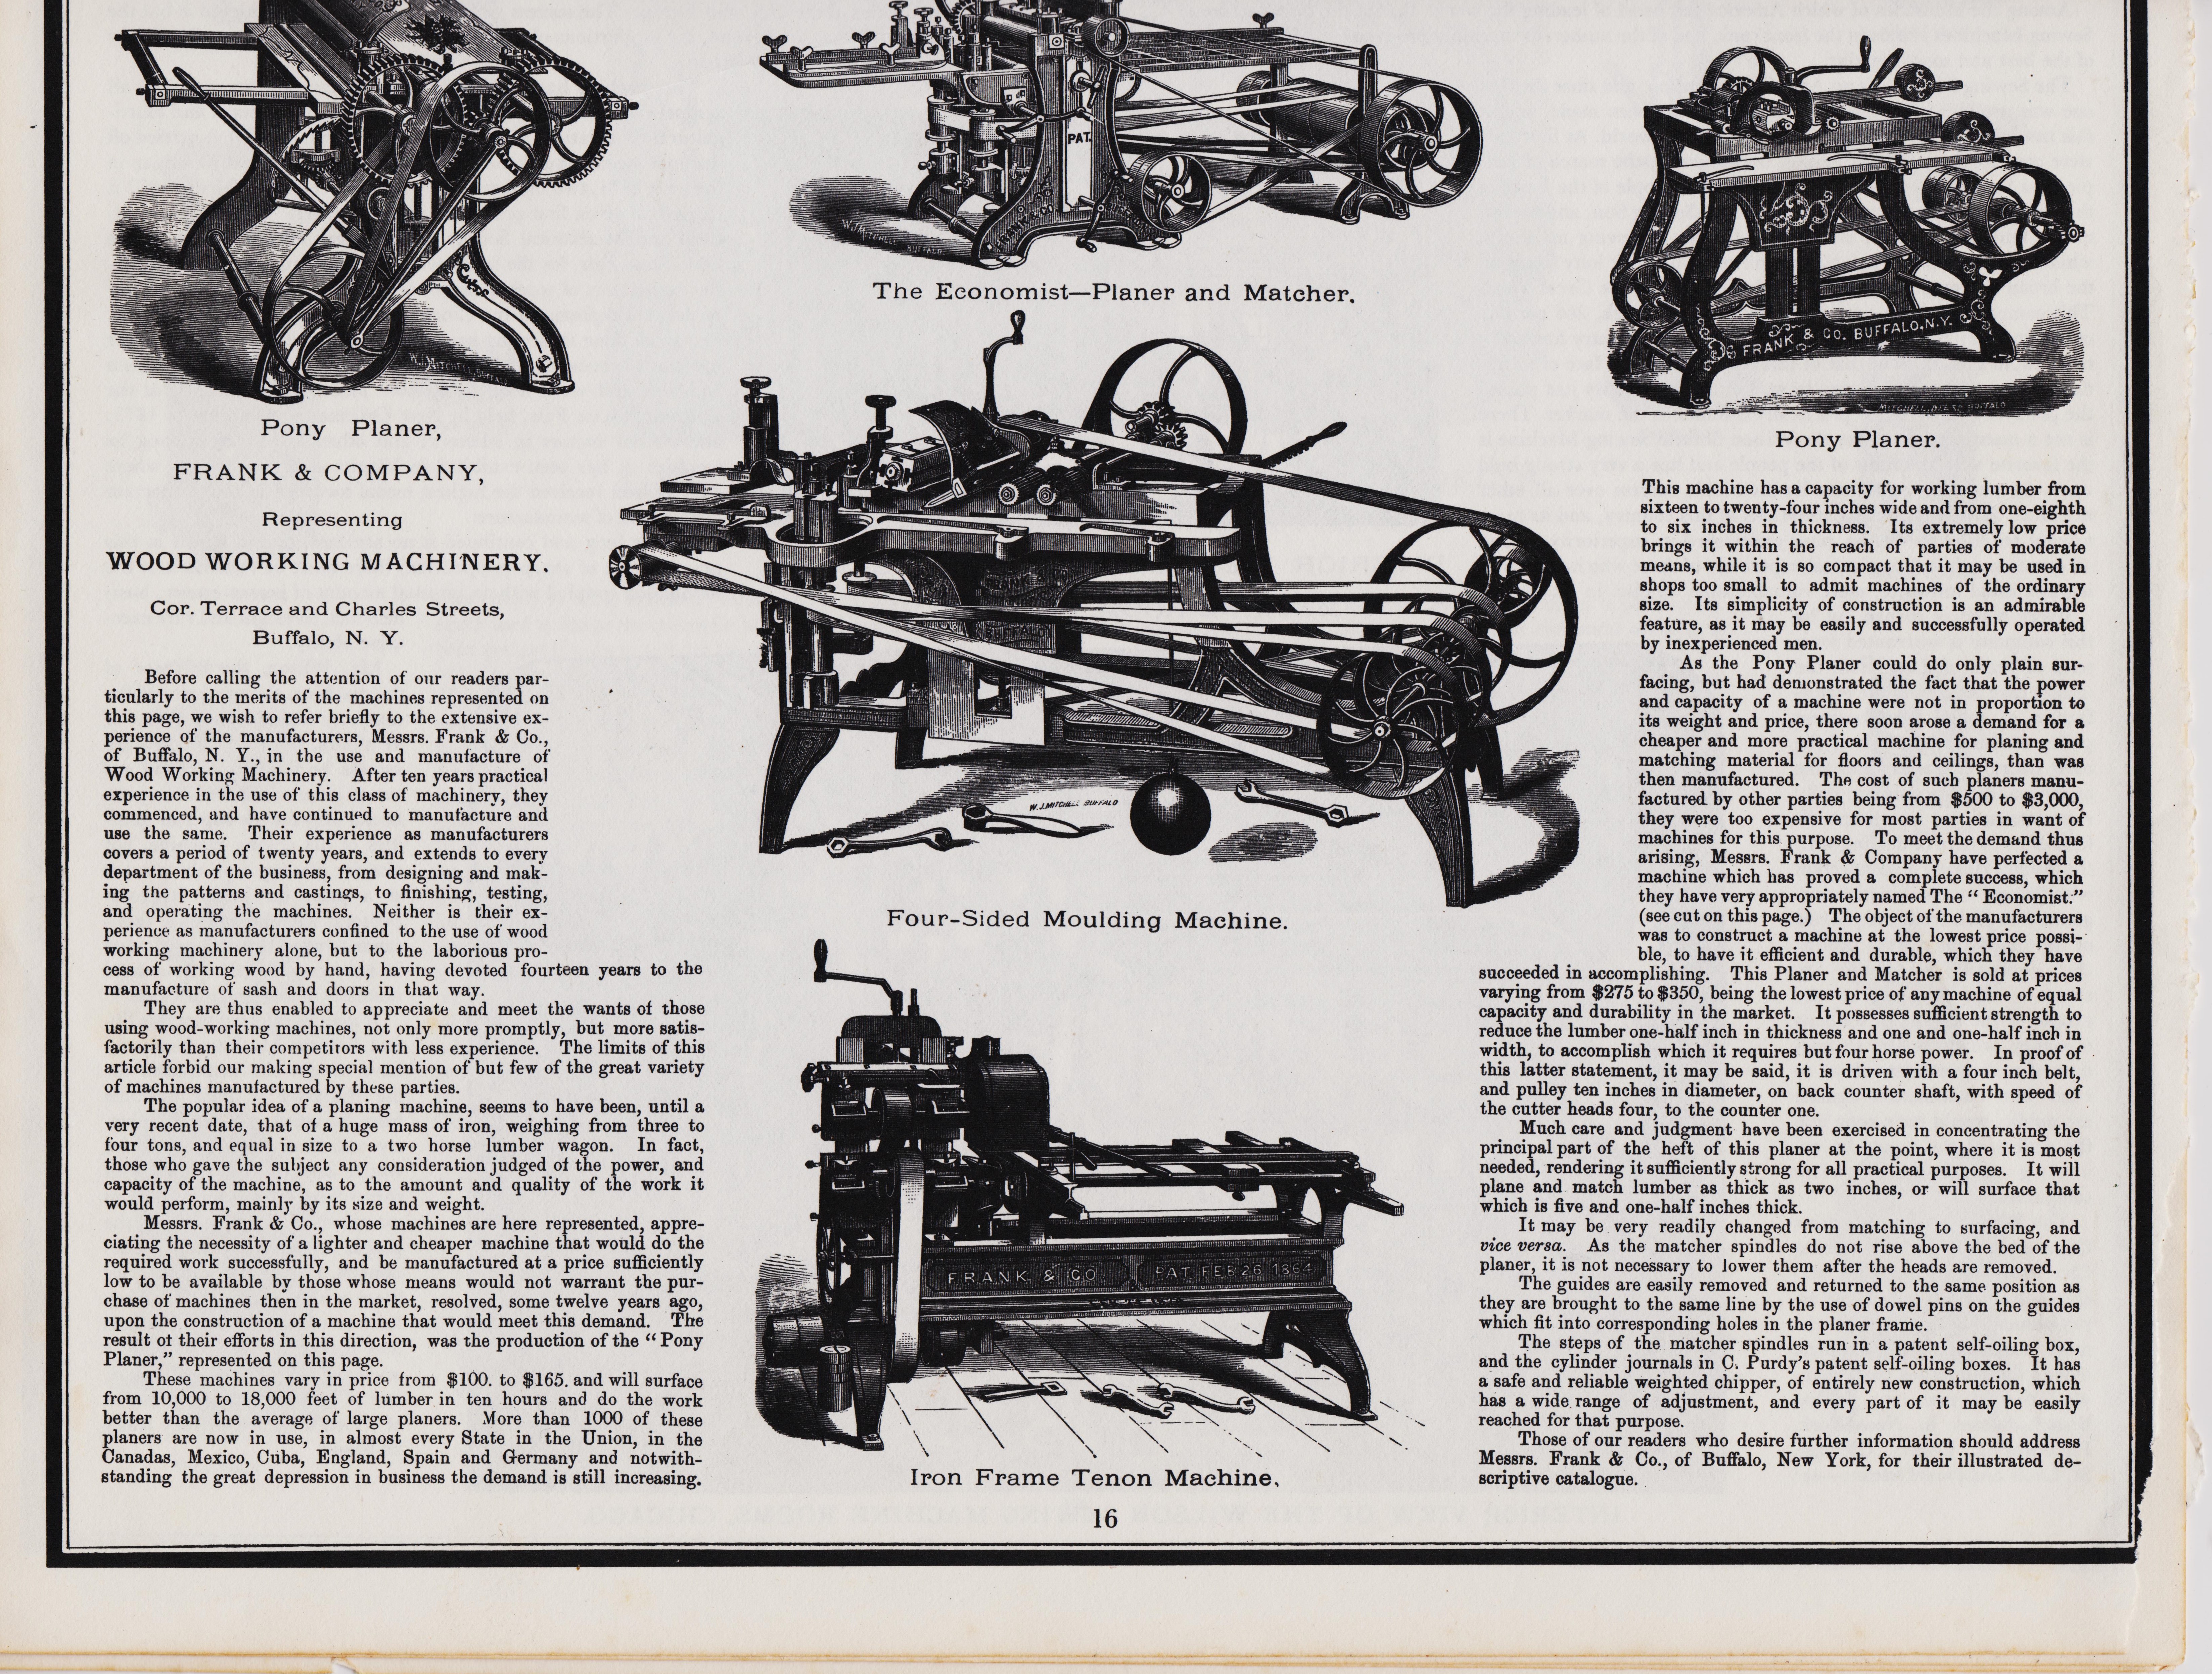 http://antiquemachinery.com/images/1876-Asher-Adams-Pictorial-Album-page-16-bot-Frank-and-company-Wood-working-Machinery.jpg